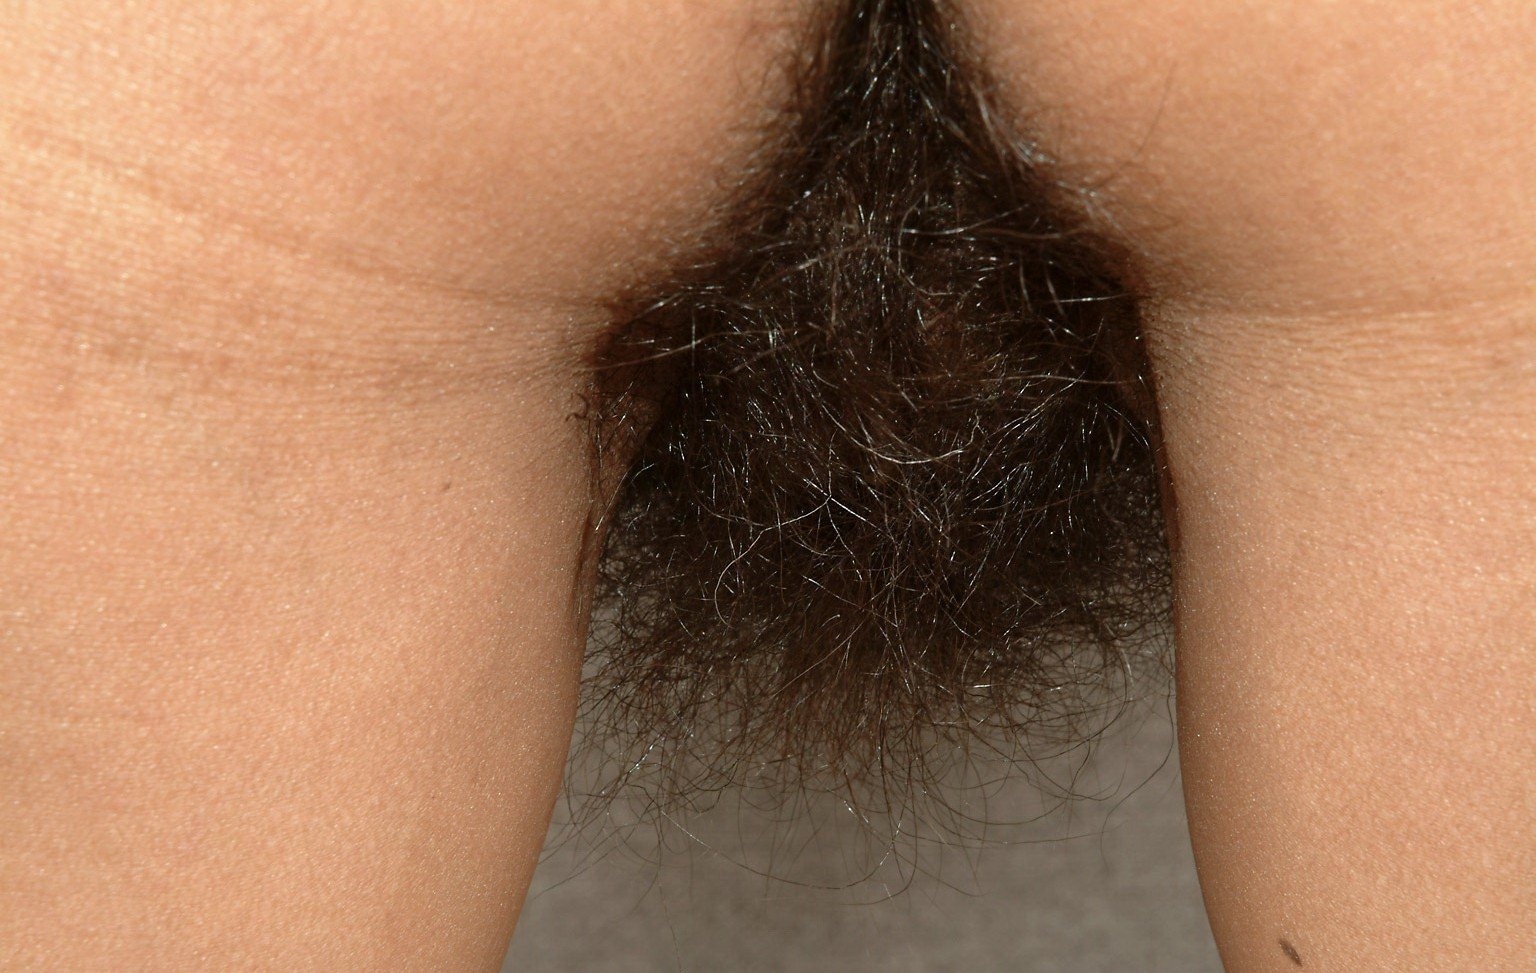 https://xhamster.monster/46003-a-very-beautiful-woman-with-a-hairy-pubis.html